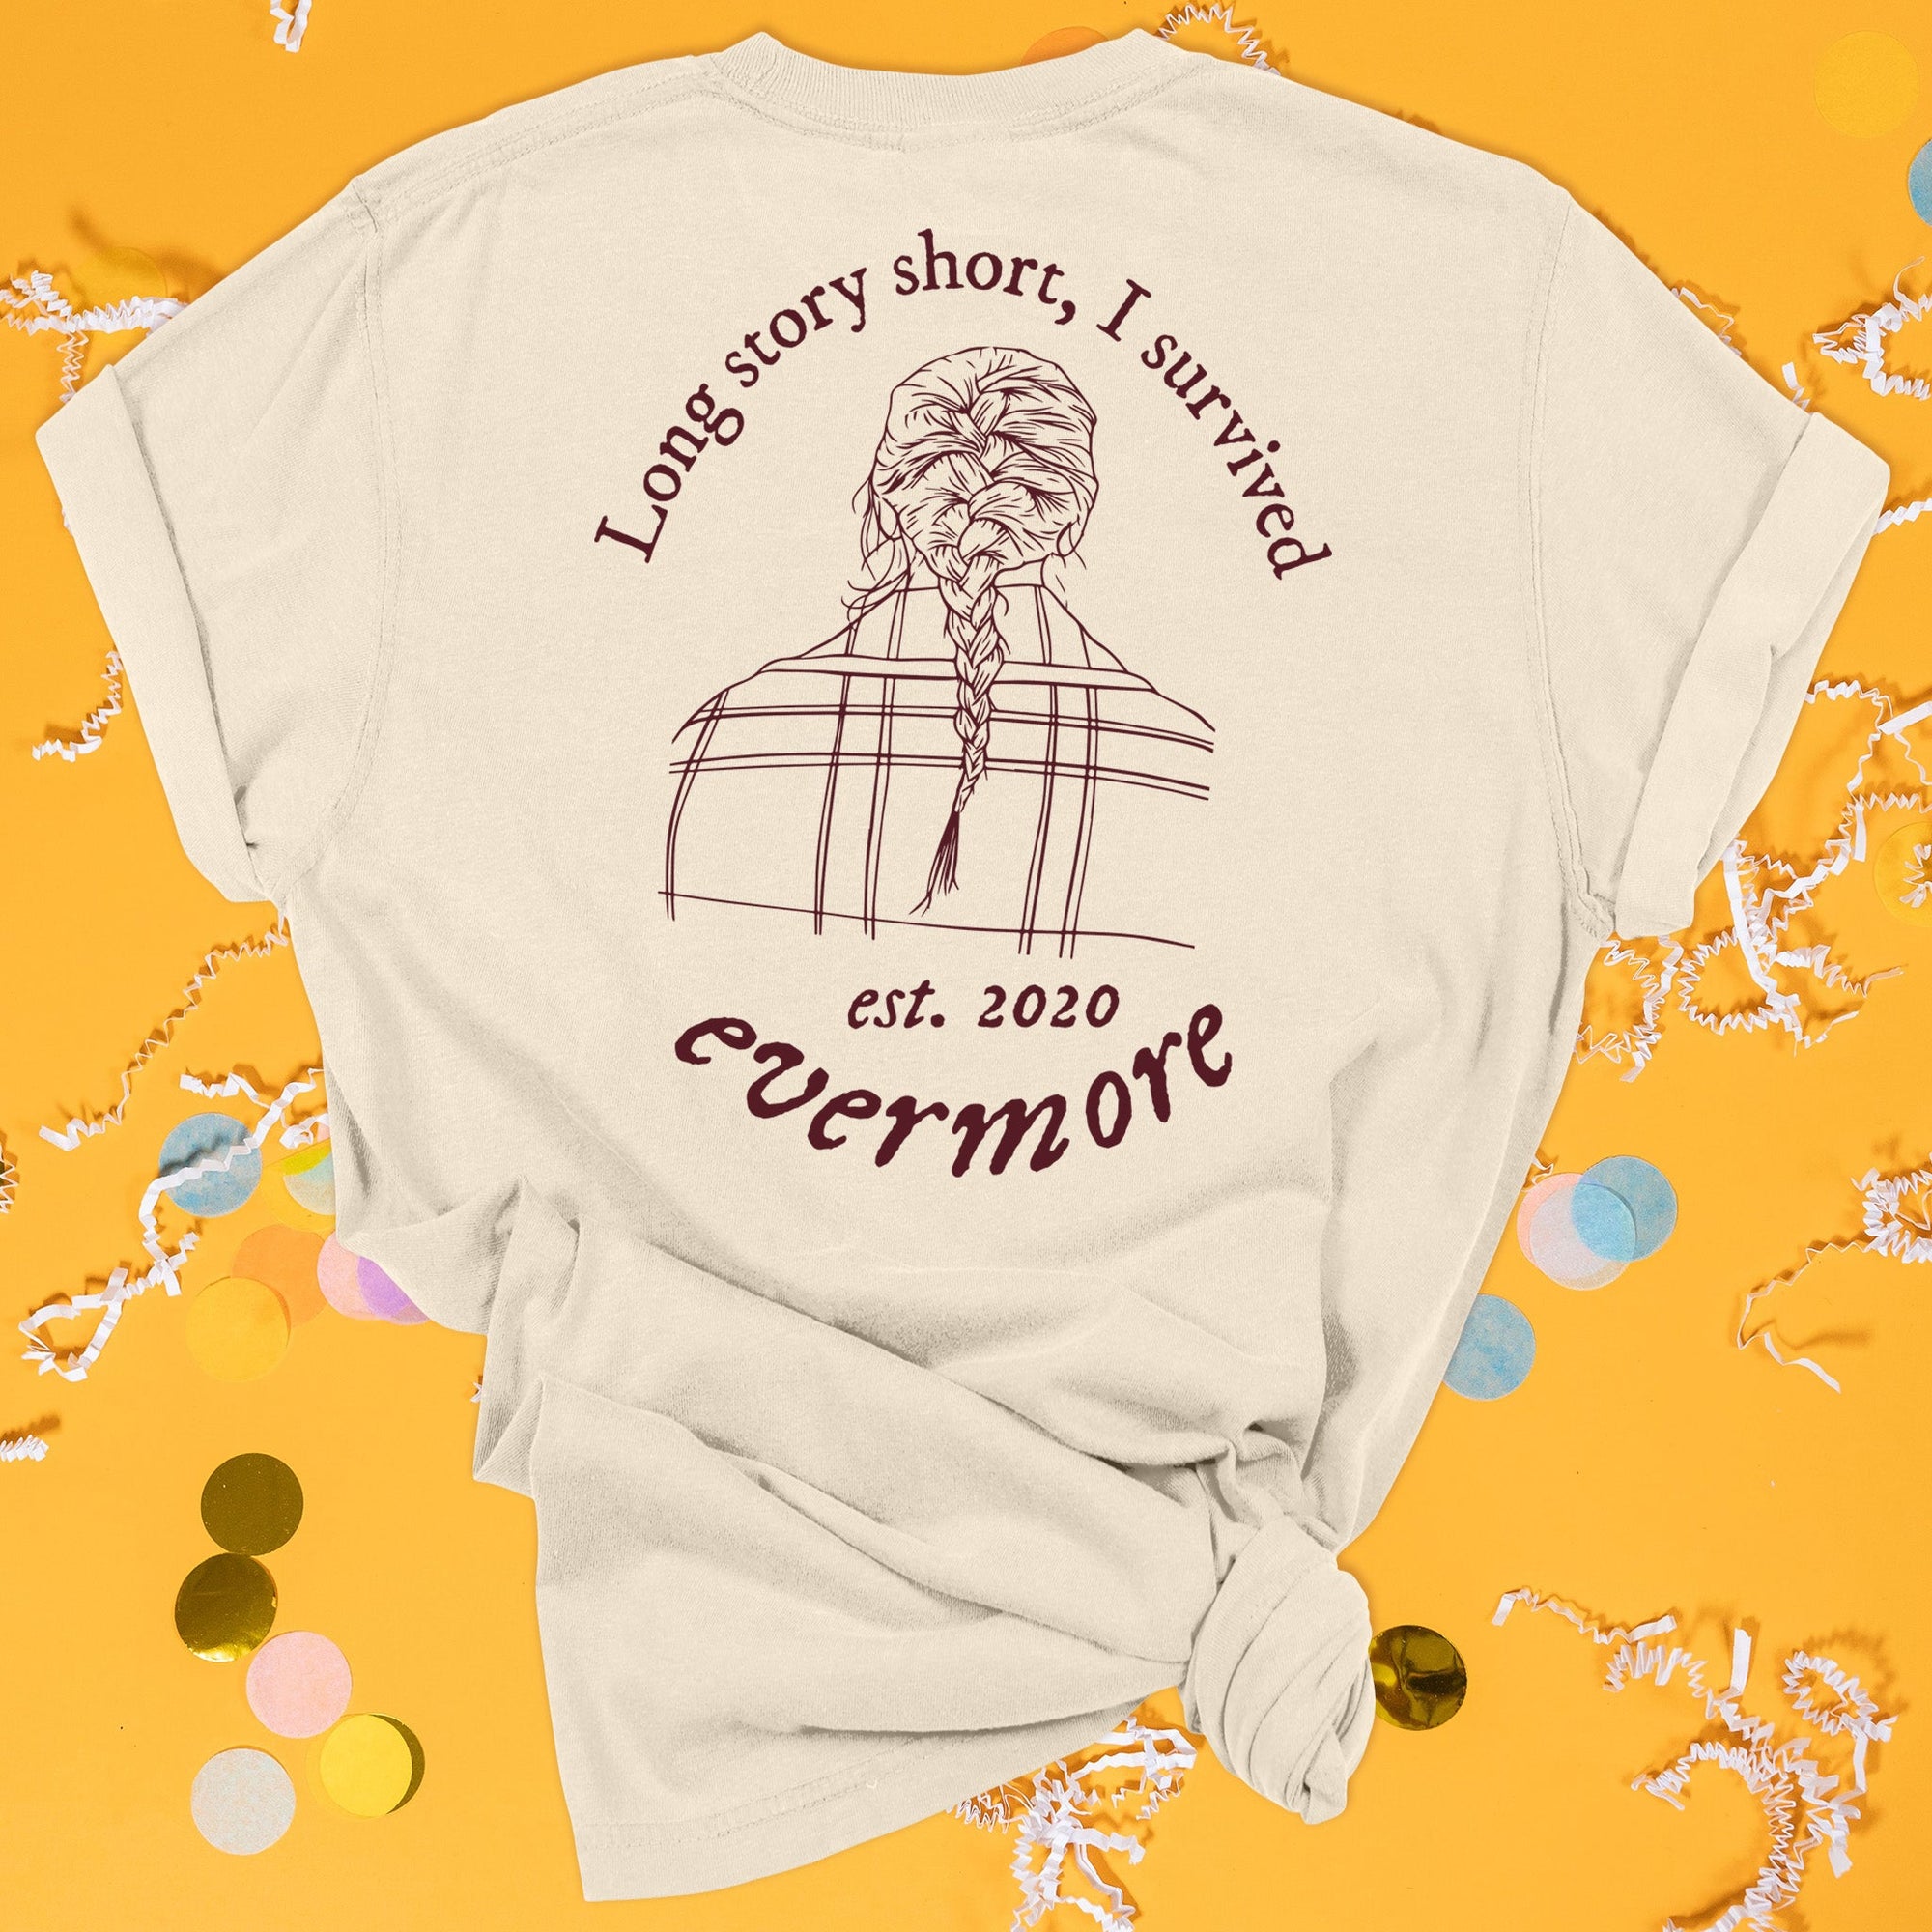 On a sunny mustard background sits the back of a t-shirt with white crinkle and big, colorful confetti scattered around. This Taylor Swift Inspired Reputation tee is ivory with maroon lettering and illustration. It has an illustration of the back of a head with a french braid hair style and a plaid coat and it says "Long story short, I survived" and "evermore est. 2020."